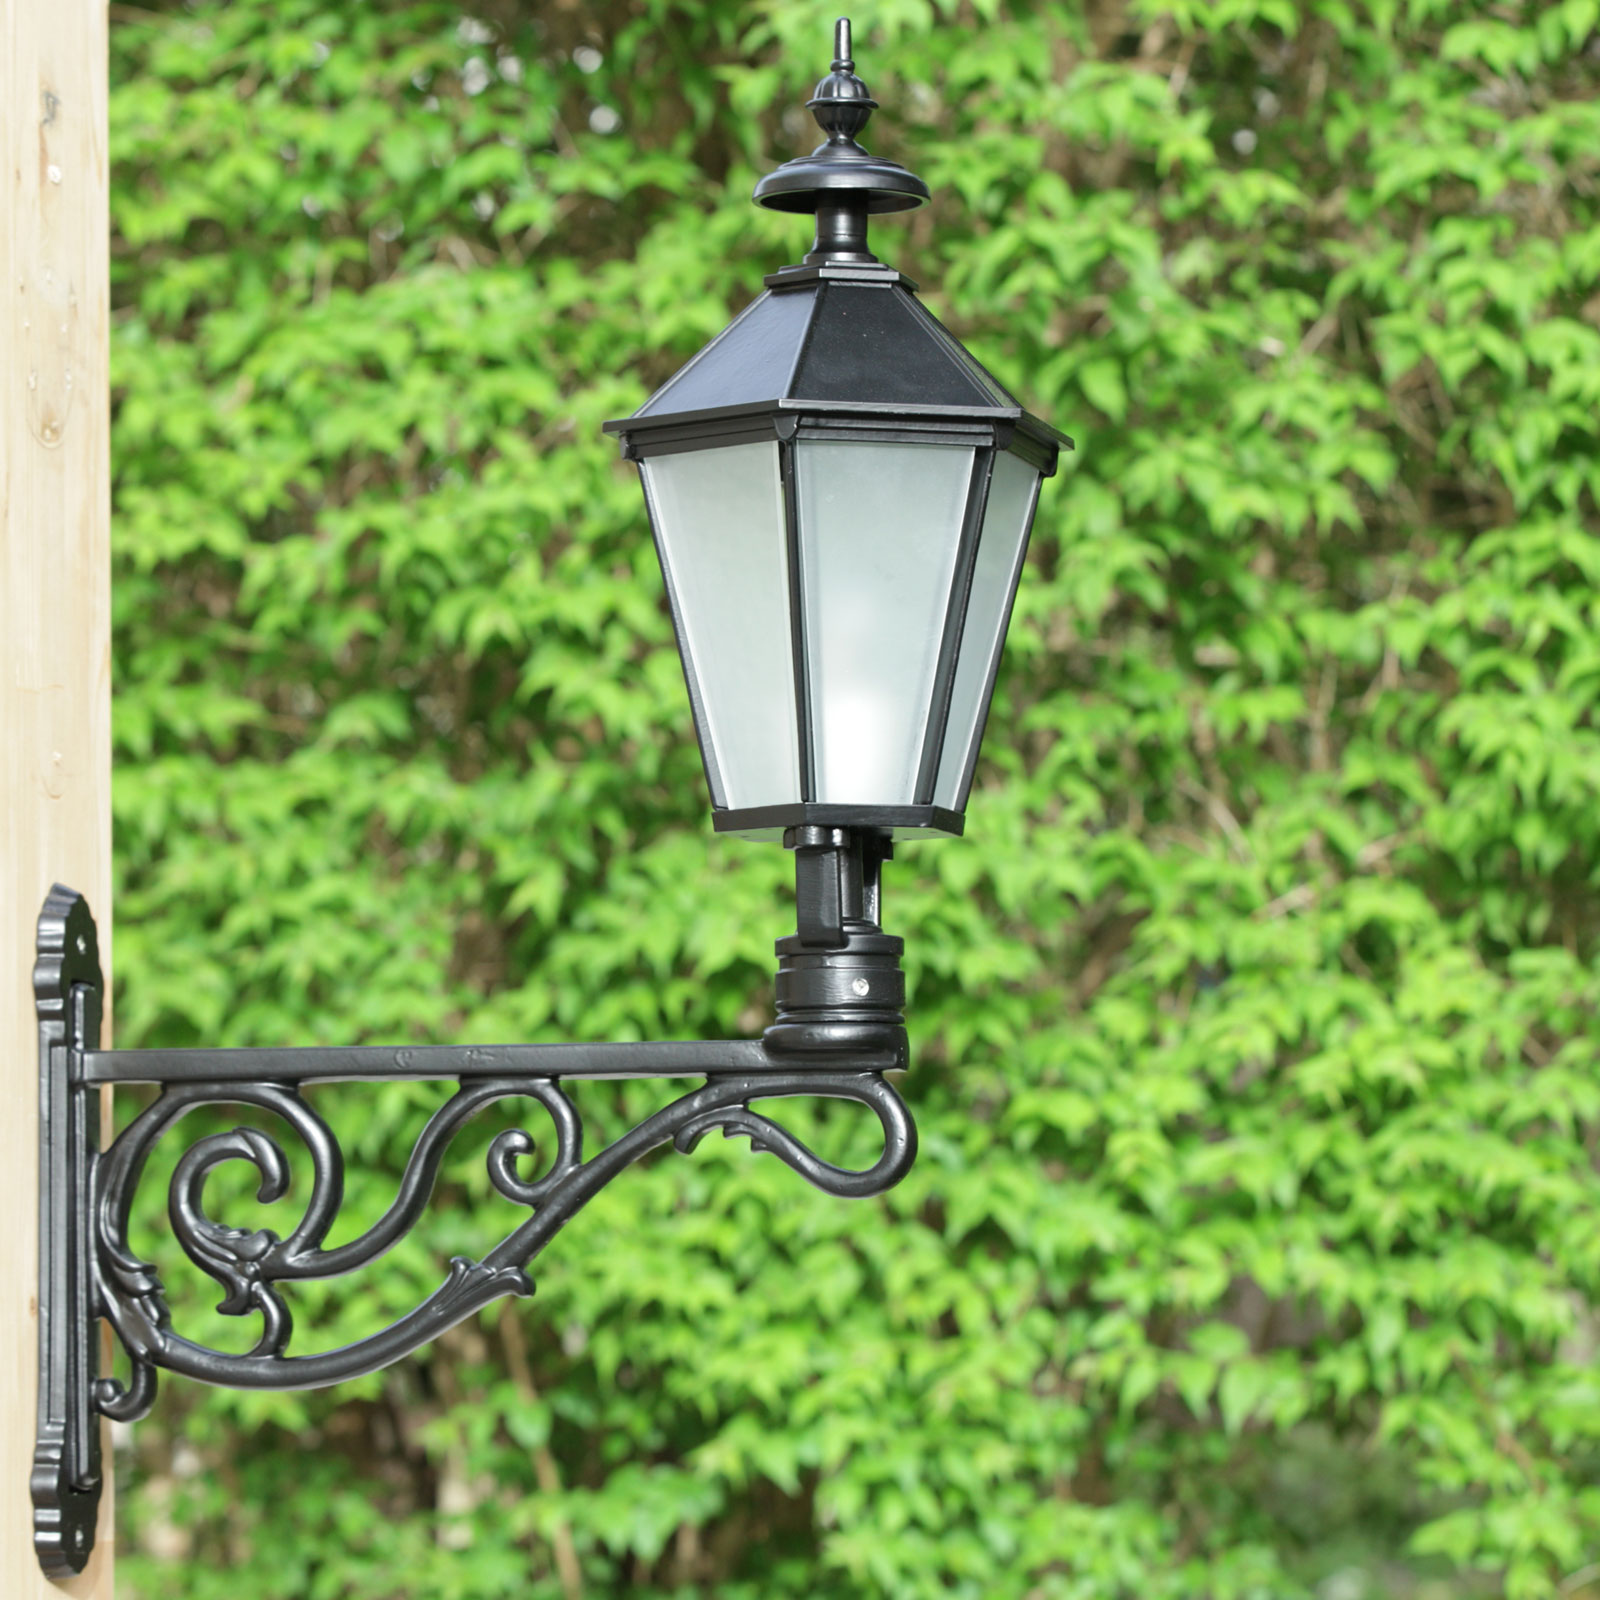 Classic Wall Lantern Thorn 60.61: Model in black with smaller lantern and satin glass